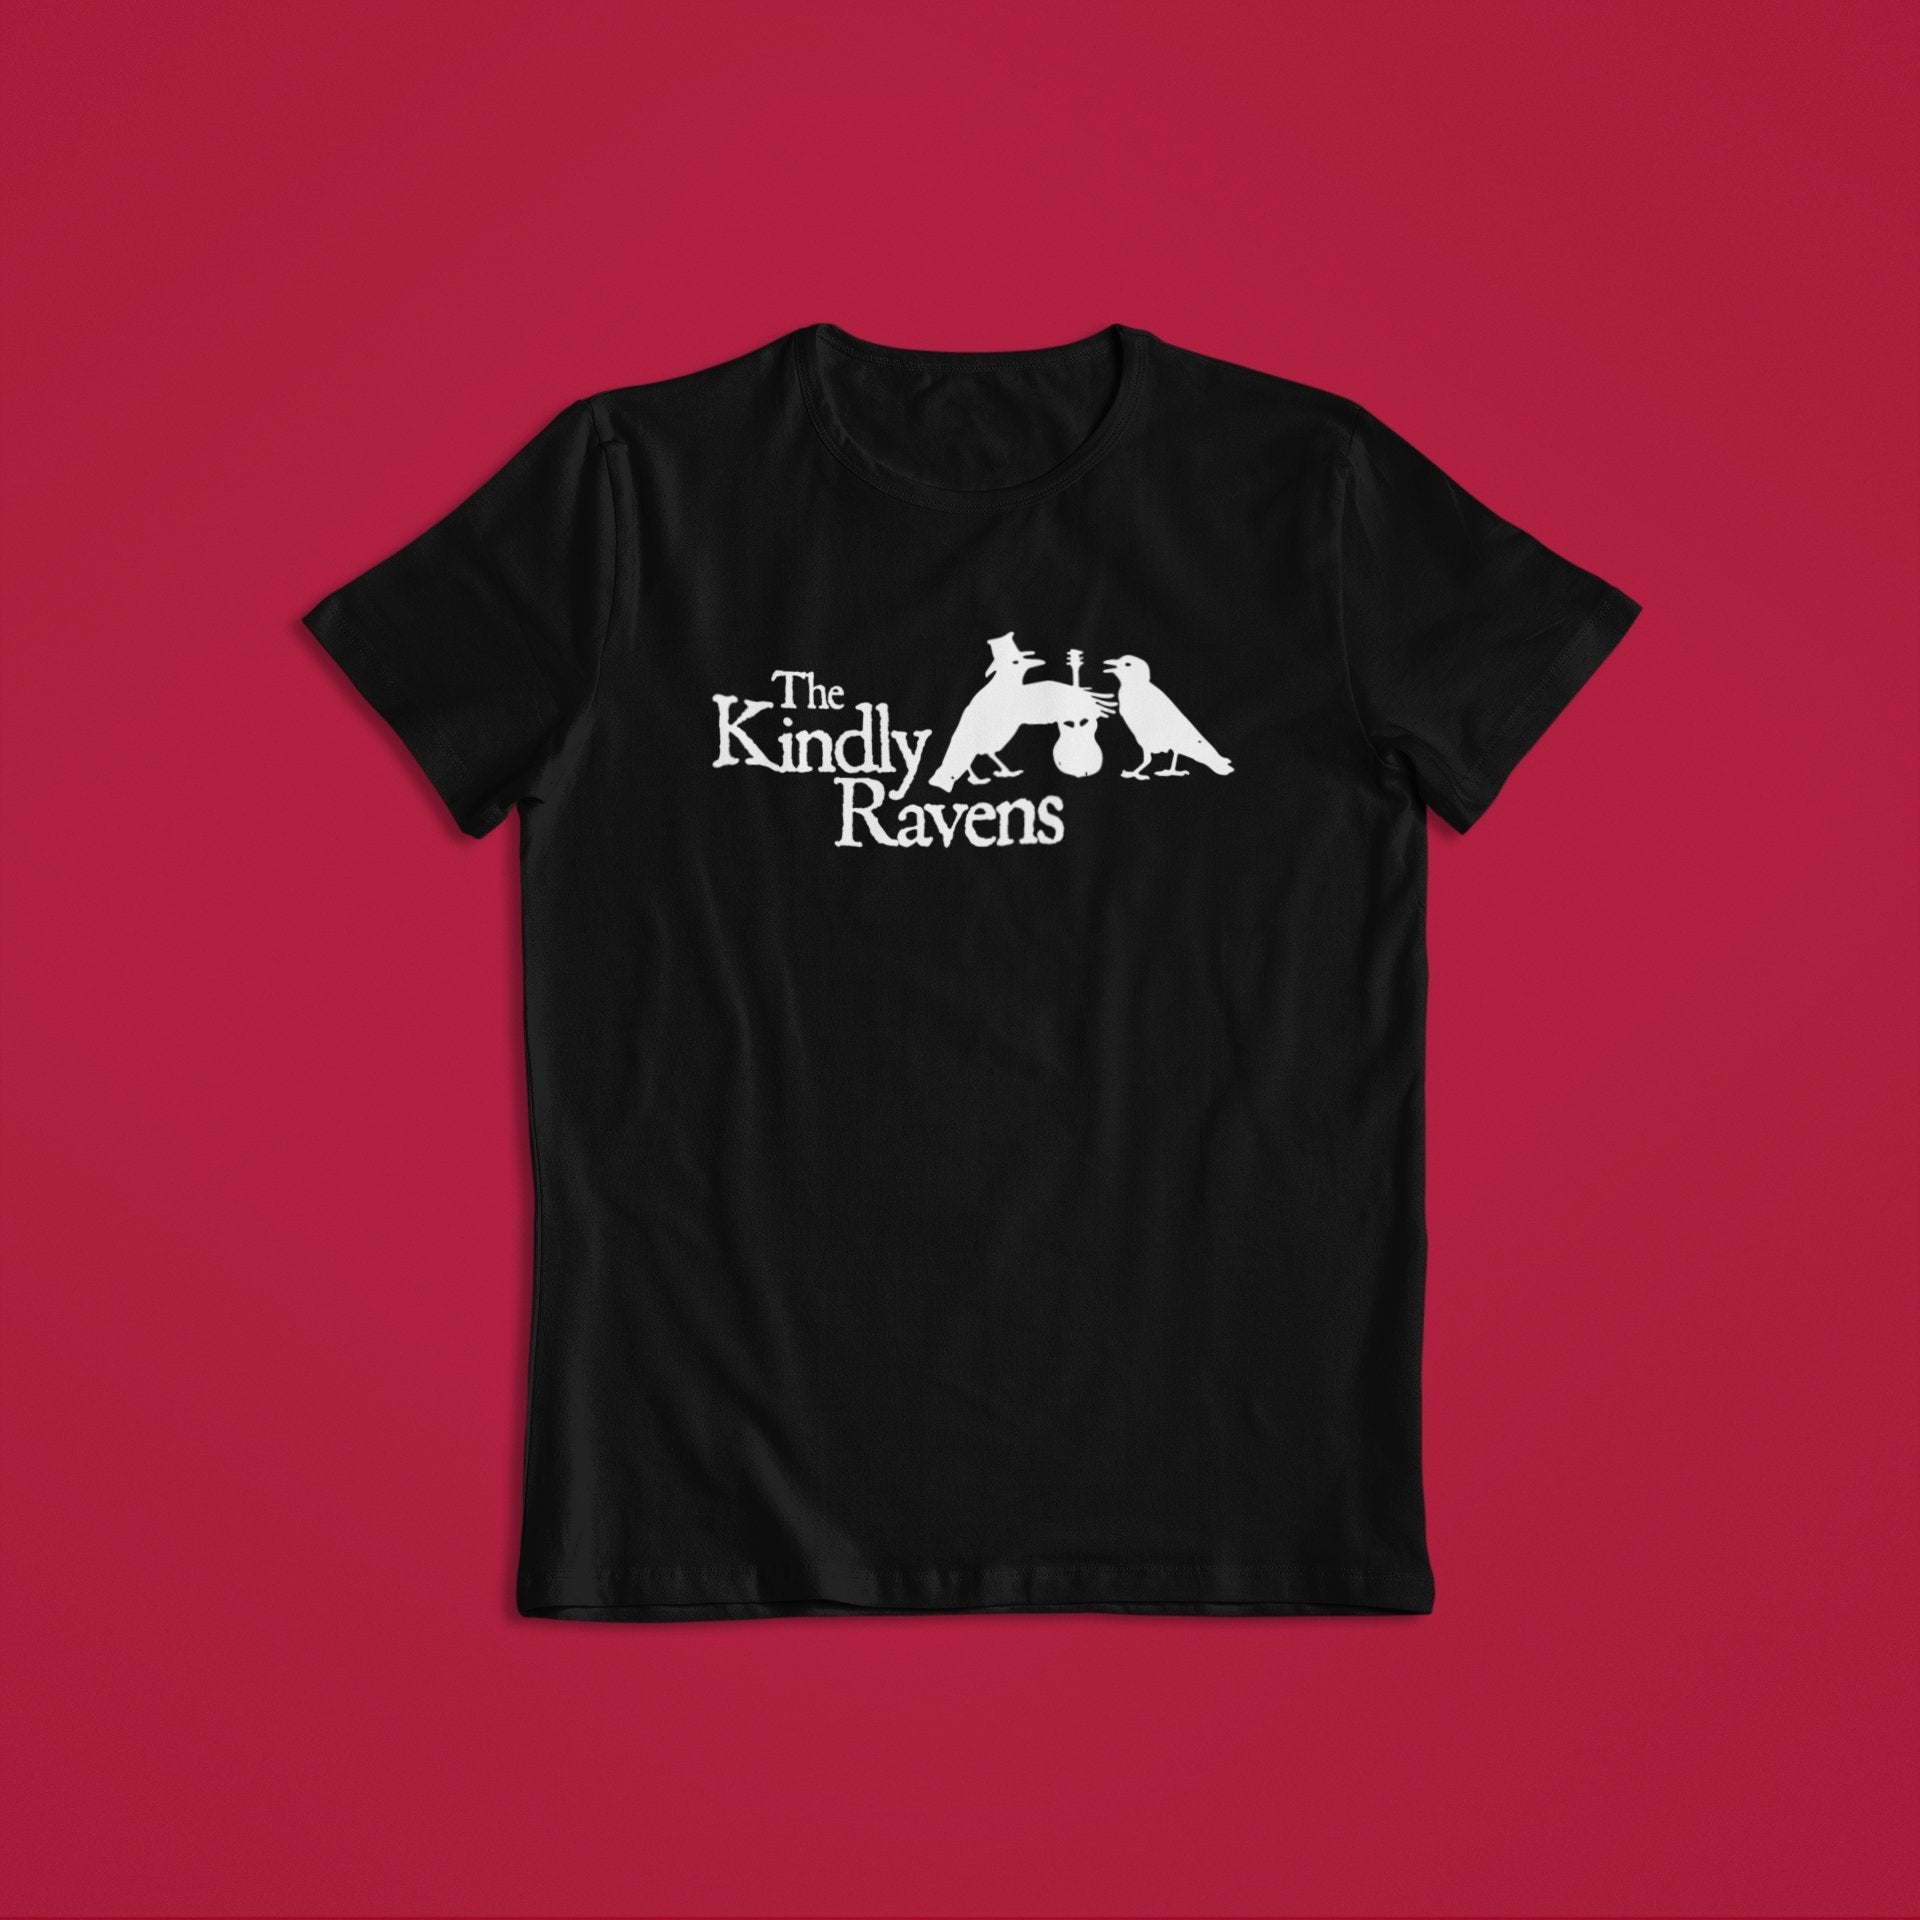 The Kindly Ravens T-Shirt - The Kindly Ravens X Lost Minds - Lost Minds Clothing